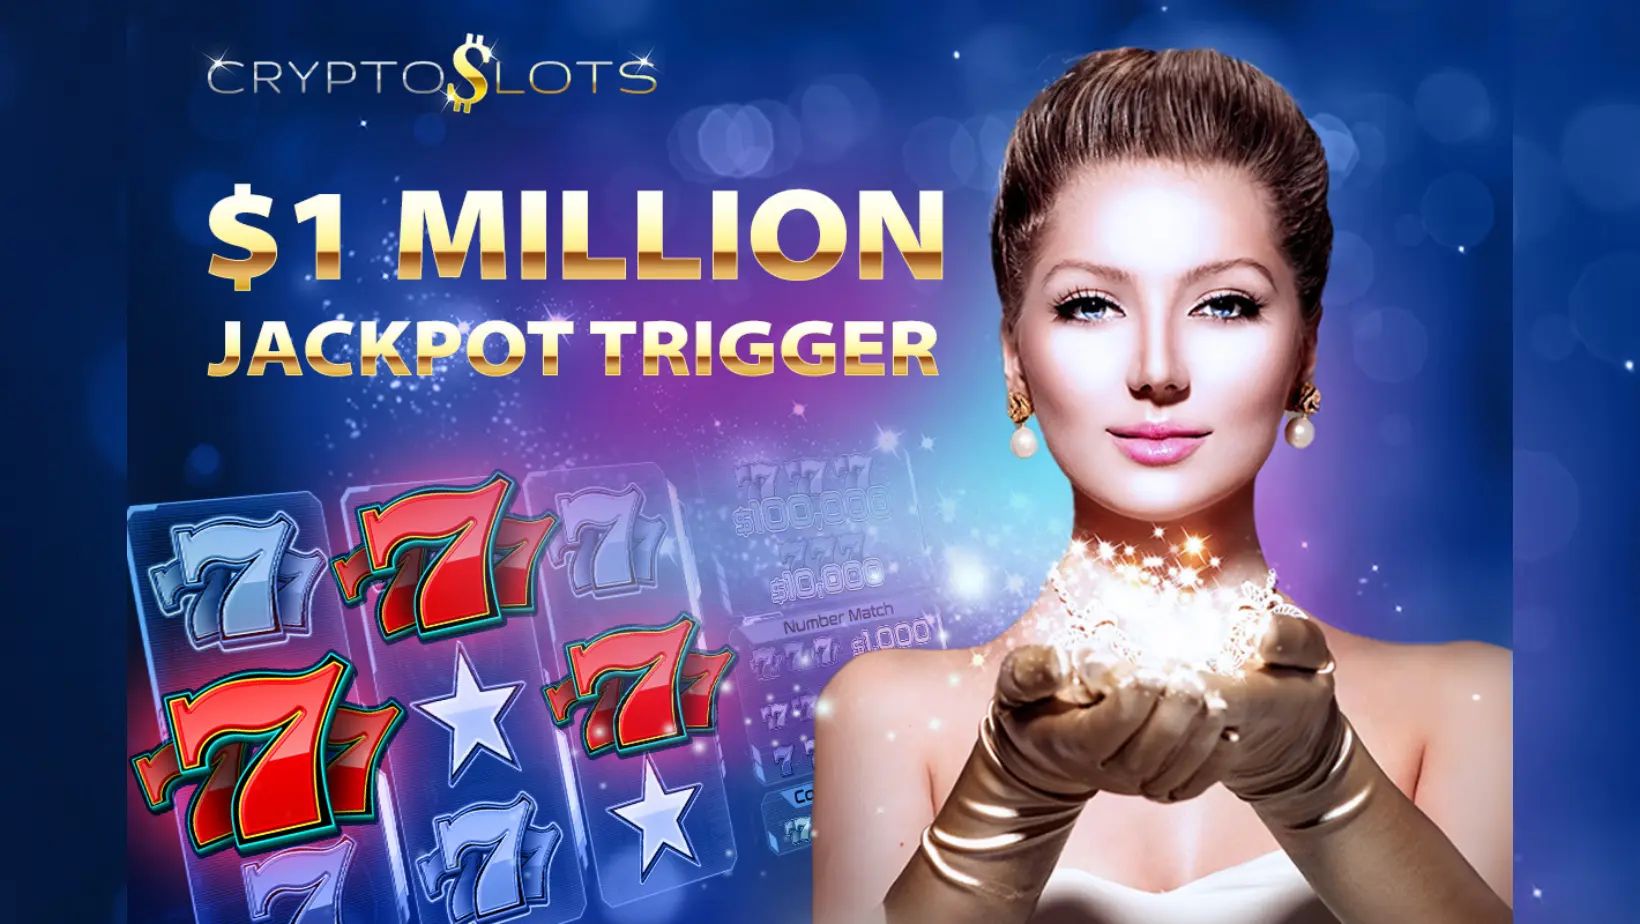 CryptoSlots Celebrates $1 Million Jackpot Trigger Winner and Releases New High Life Slot